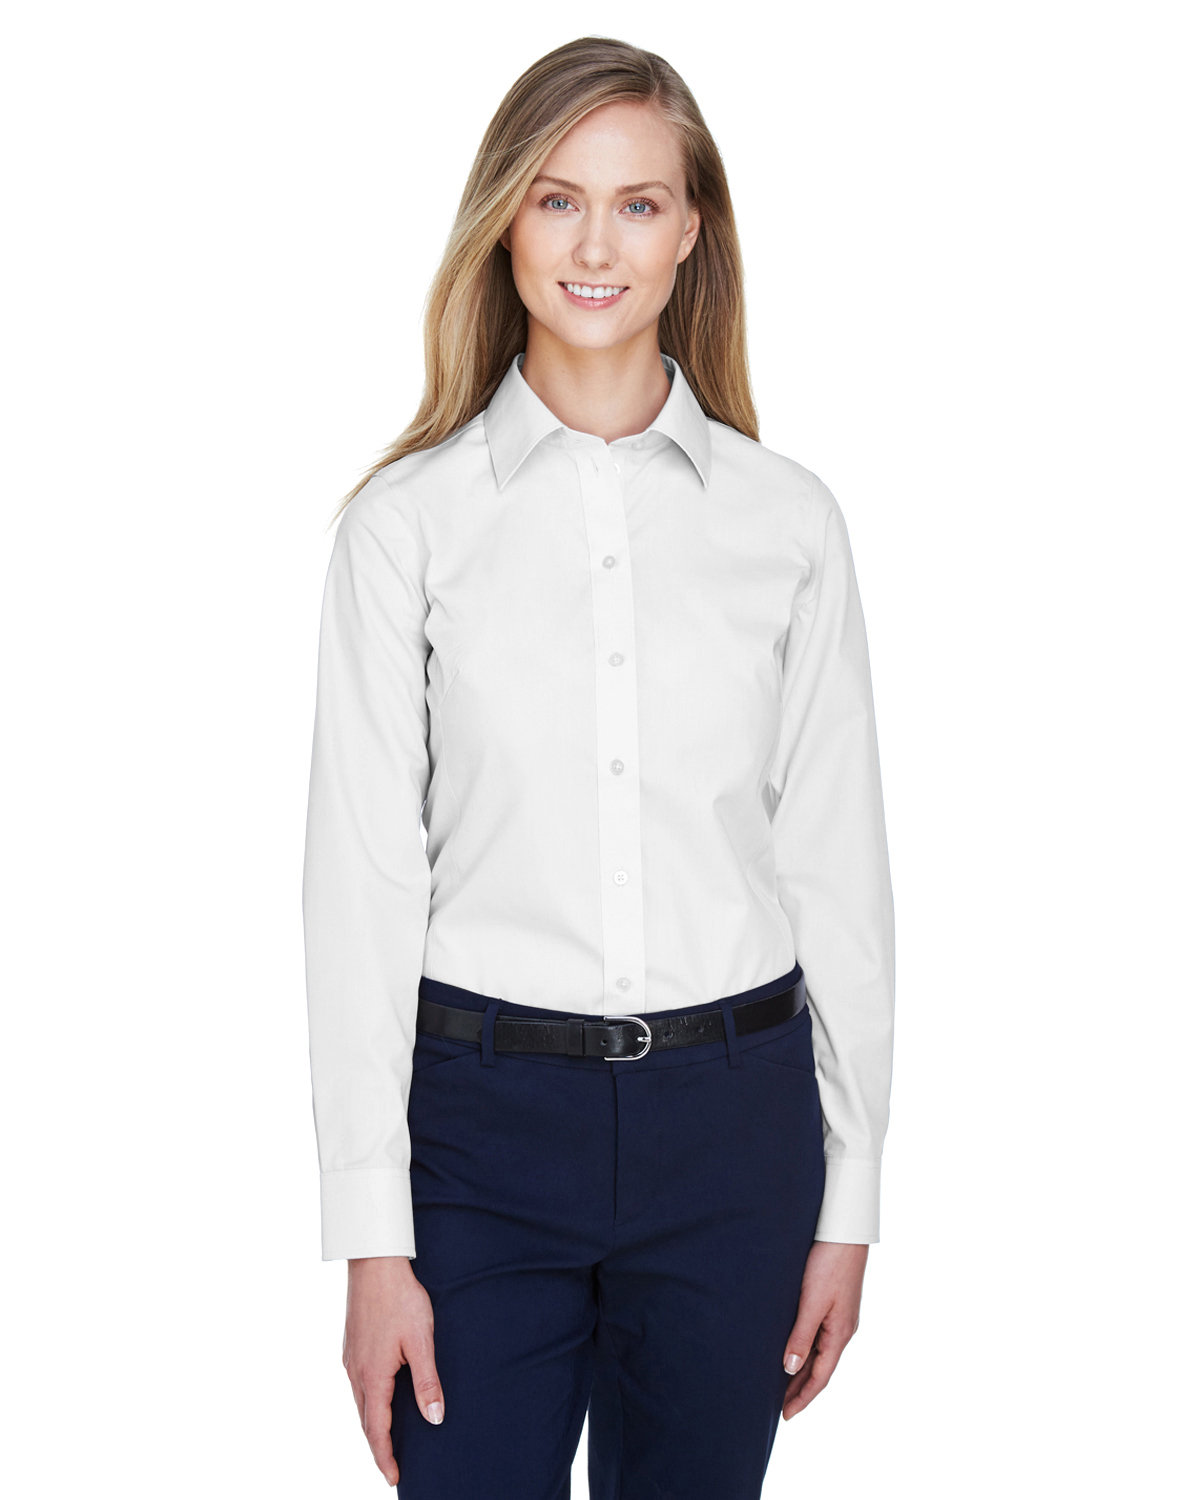 Devon & Jones Ladies' Crown Woven Collection™ Solid Broadcloth WHITE 